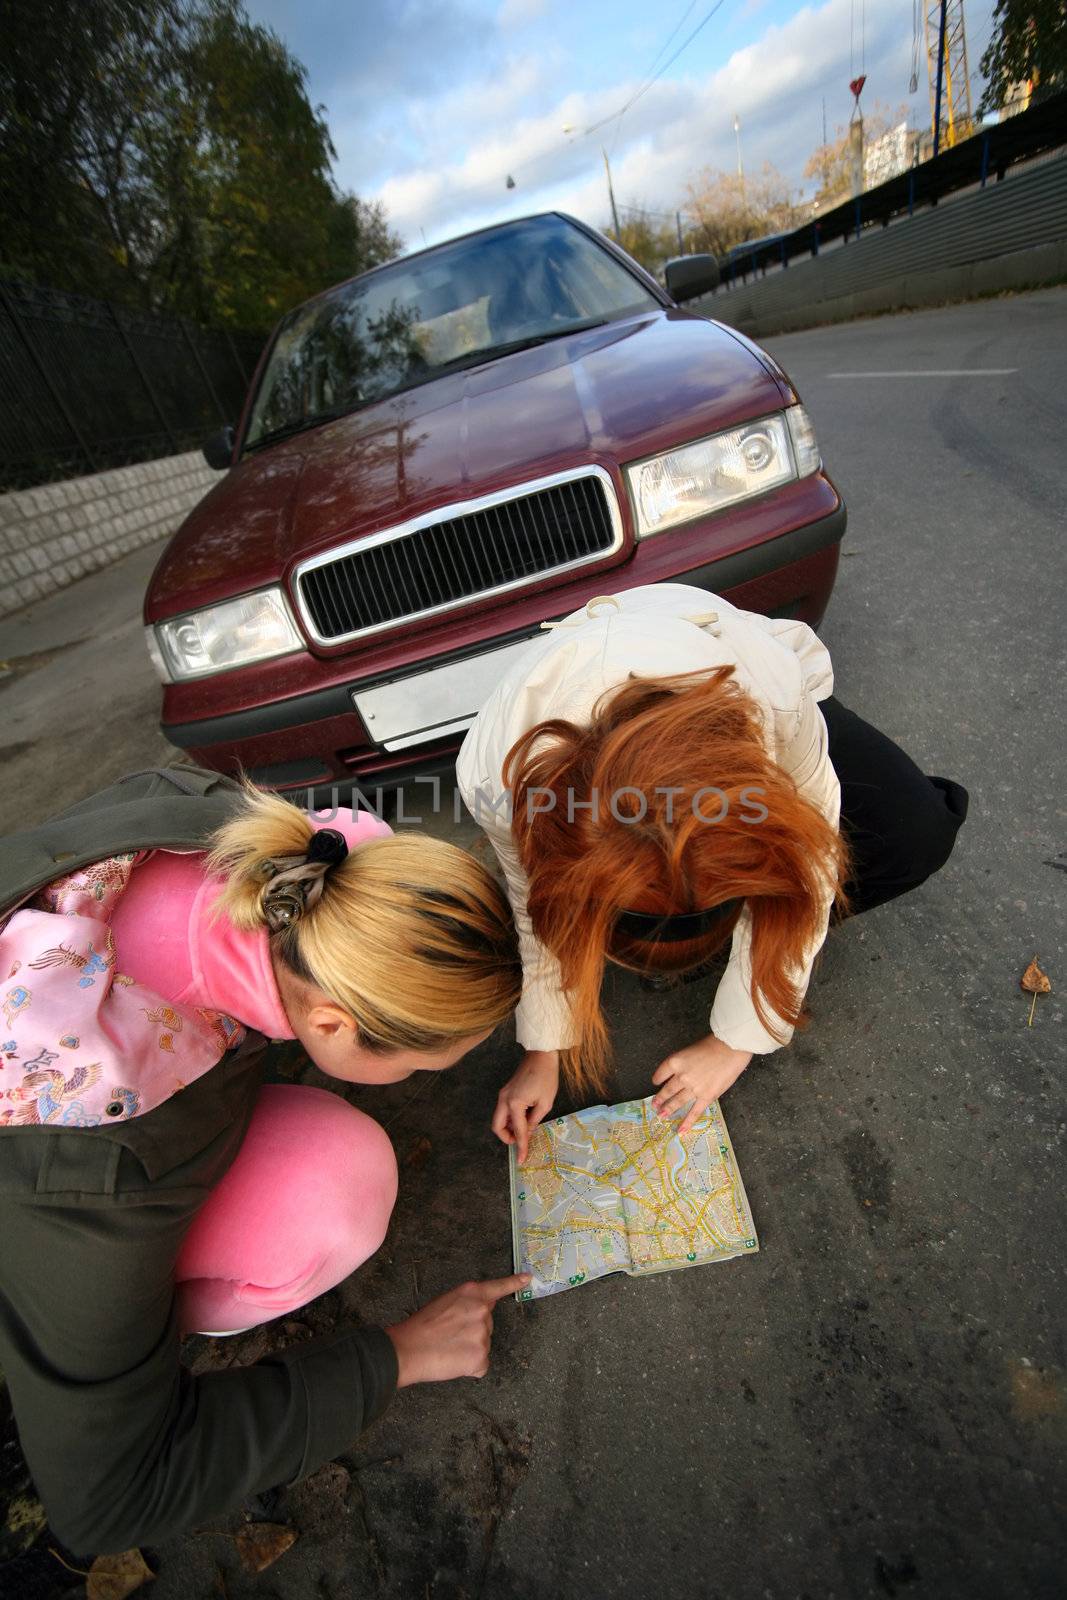 The young girls with a map of streets on a background of the red automobile